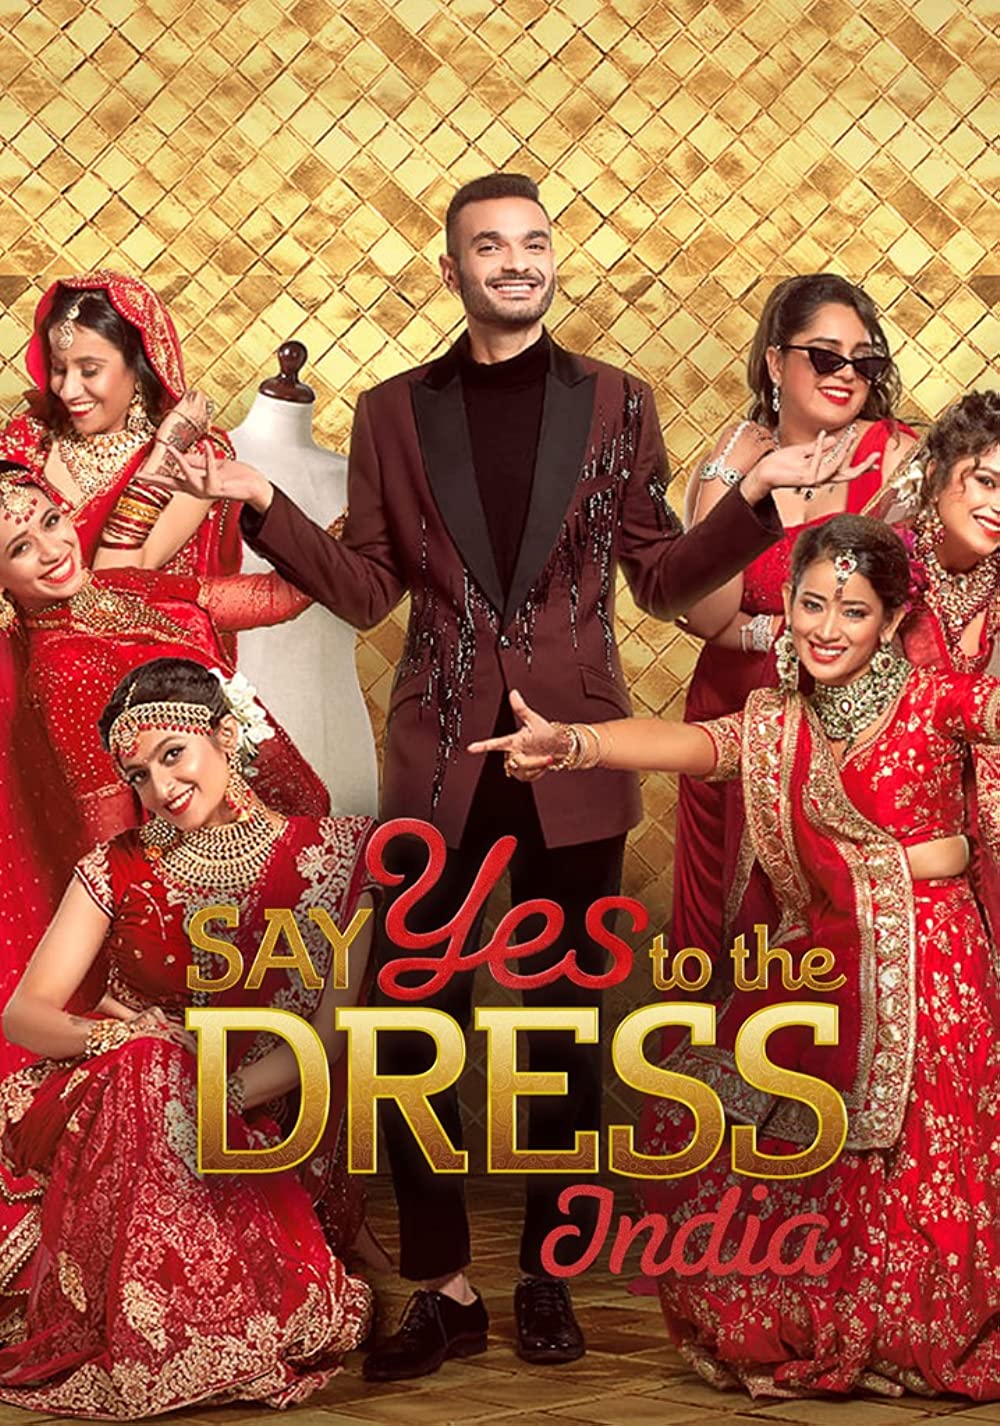 Say yes to the dress: India